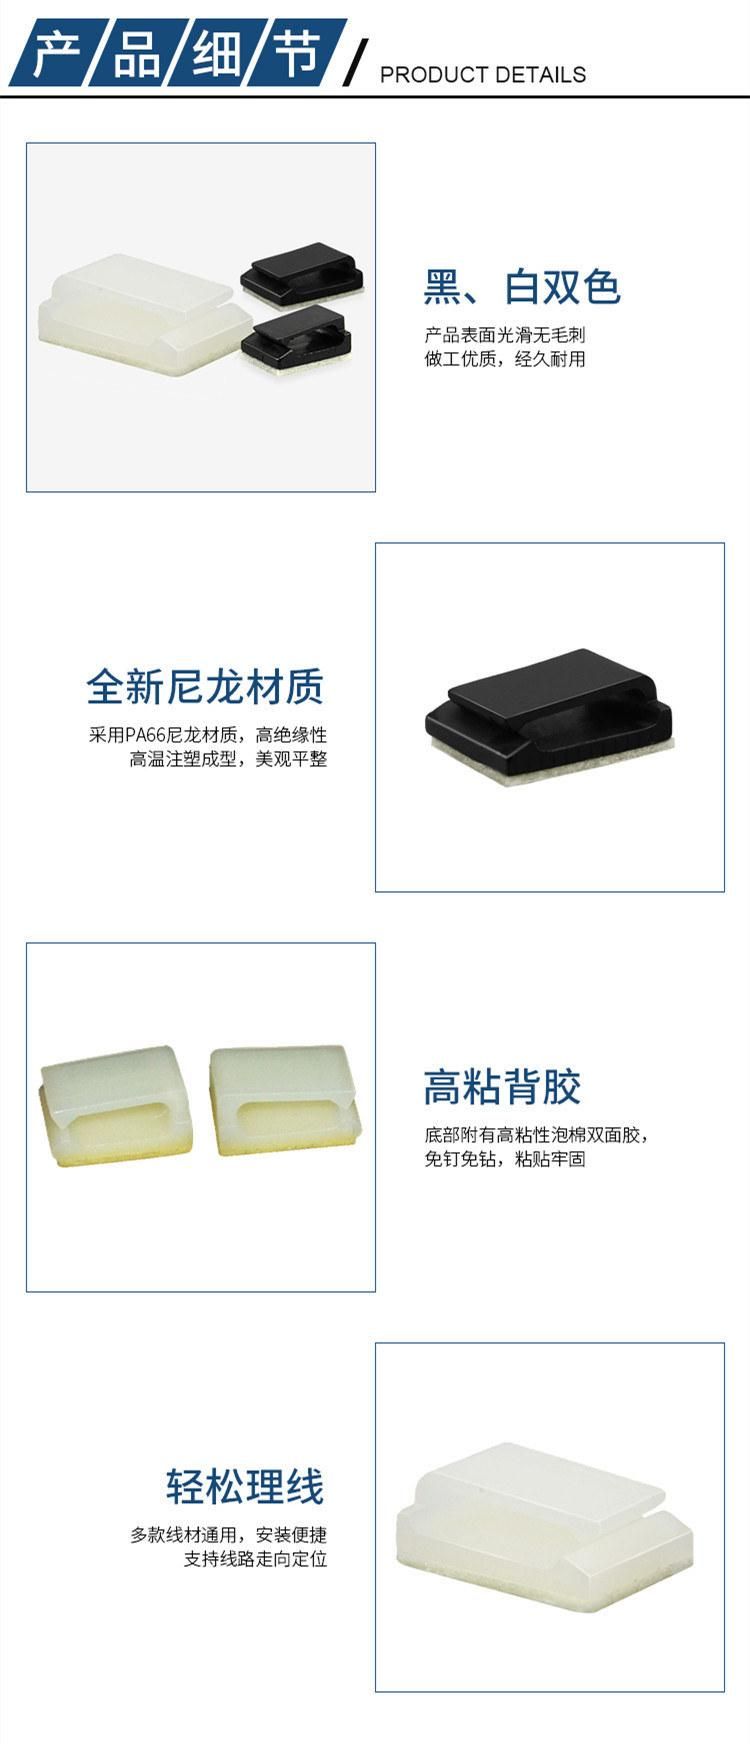 Plastic Cable Fasten Saddle Computer Case Flat Cable, Heyingcn Self Adhesive PCB Clamp Seat Nylon Wire Mount